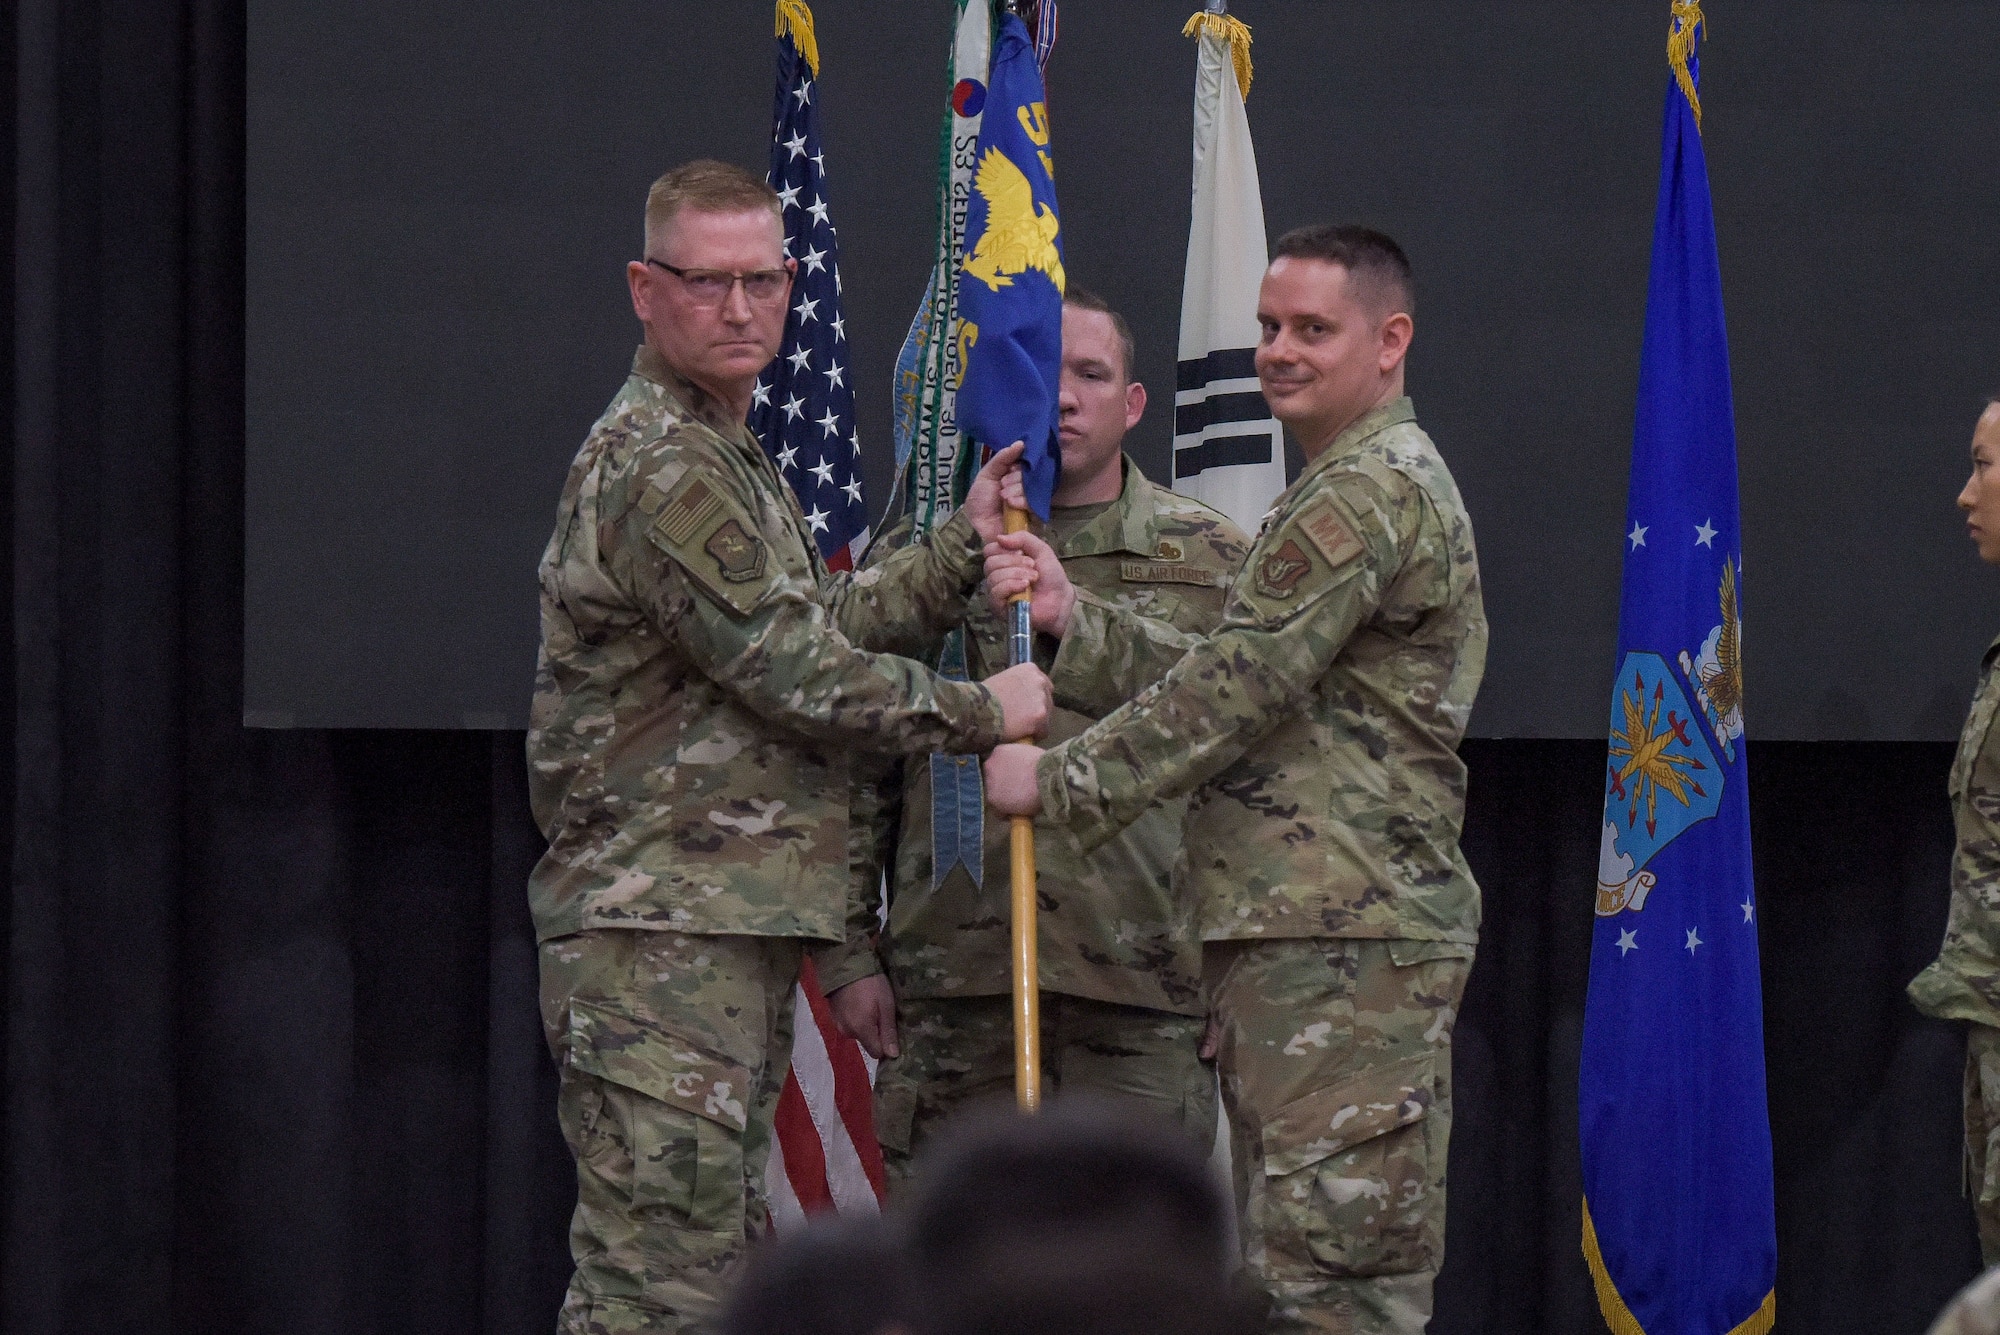 Maj. Benjamin Abshire, 51st Maintenance Squadron outgoing commander, relinquishes command during 51st MXS change of command ceremony at Osan Air Base, Republic of Korea, May 23, 2022.